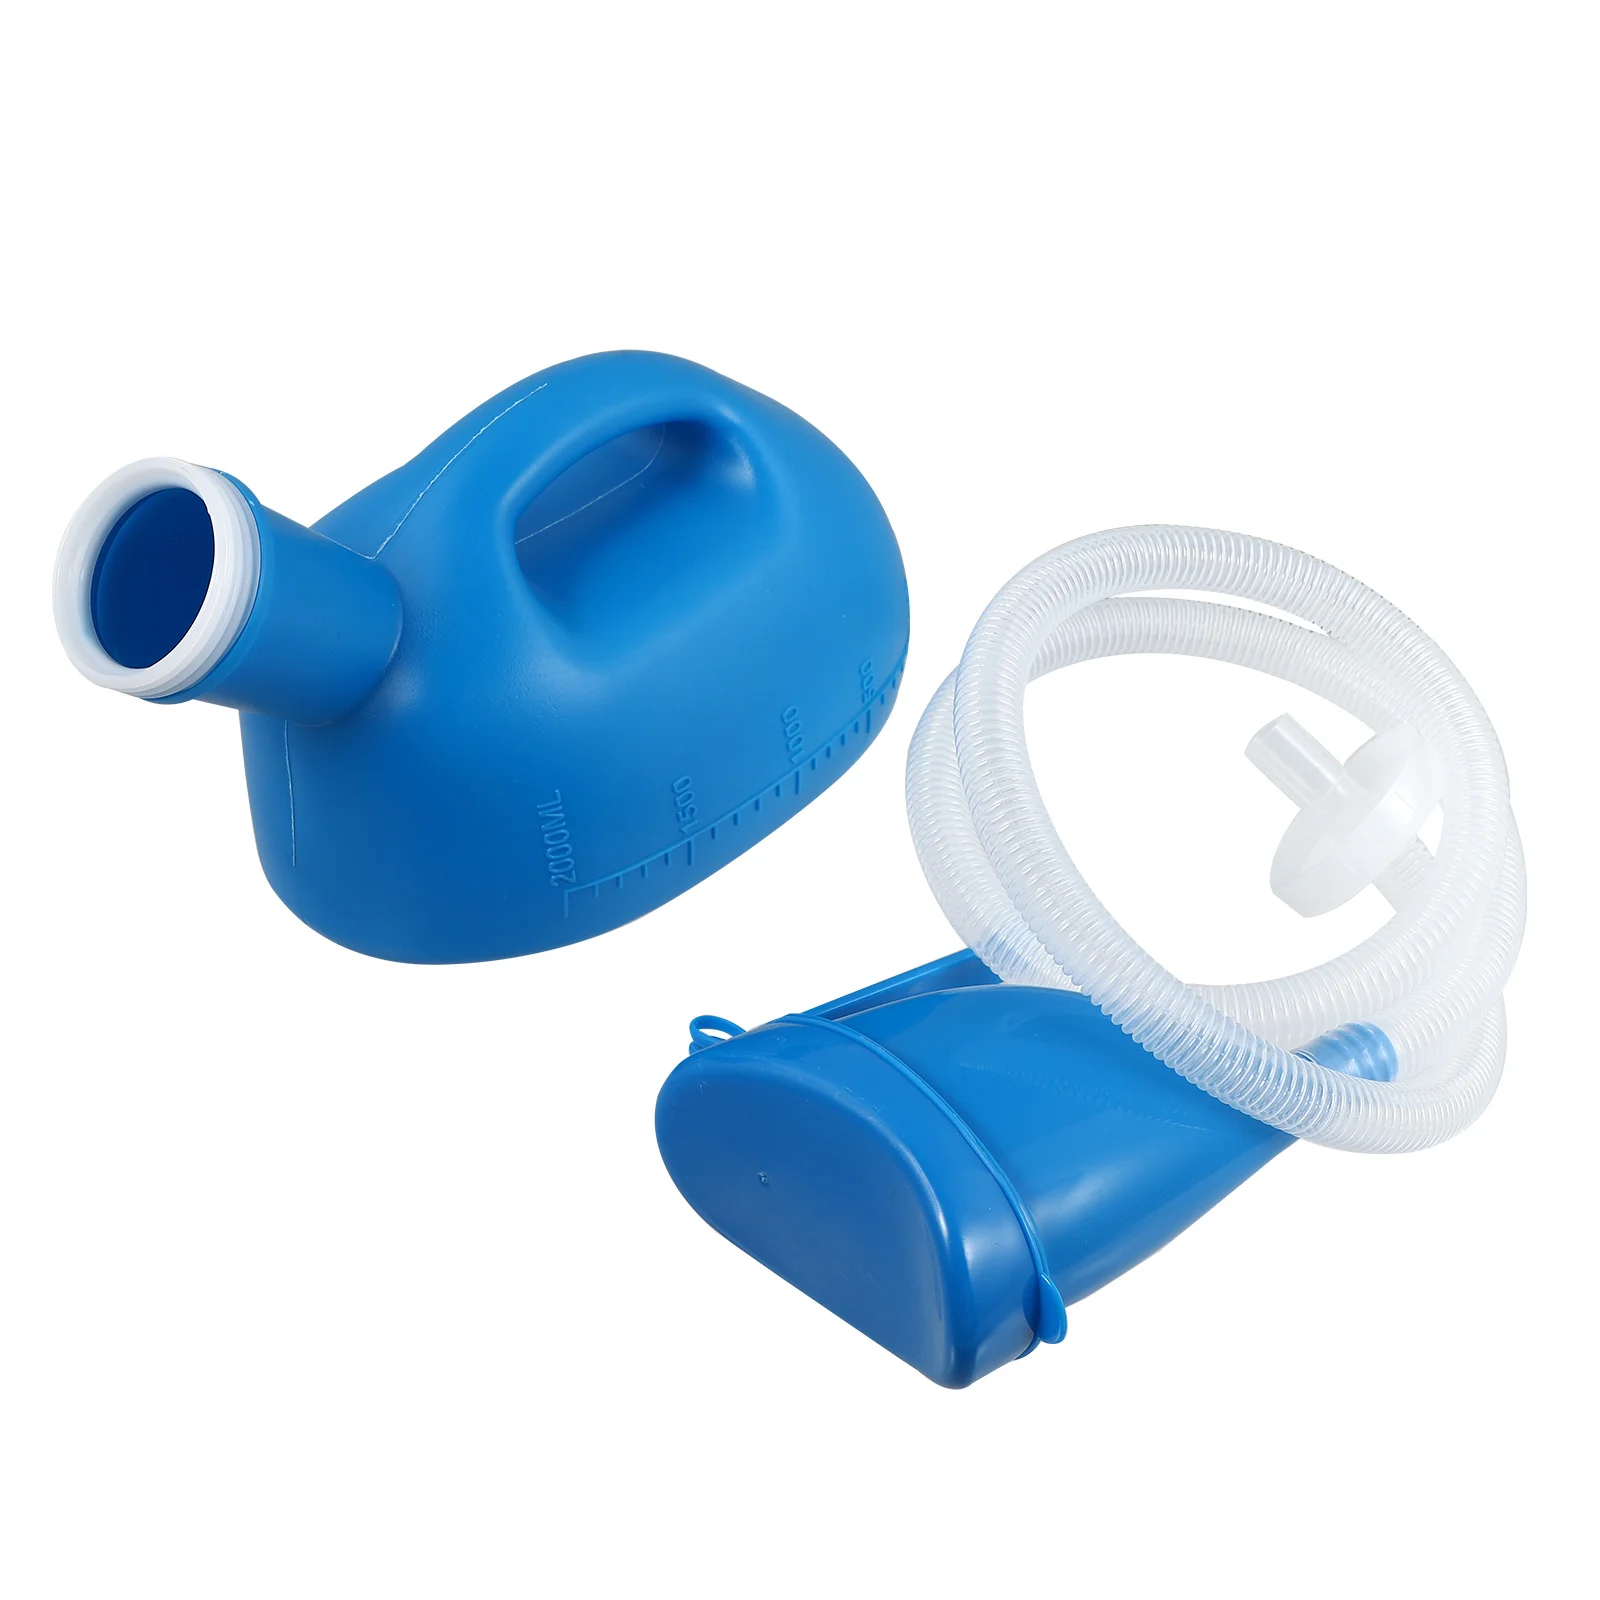 

Portable Urinals for Men and Women in Hospitals, Beds, Wheelchairs, Camping, and Travel